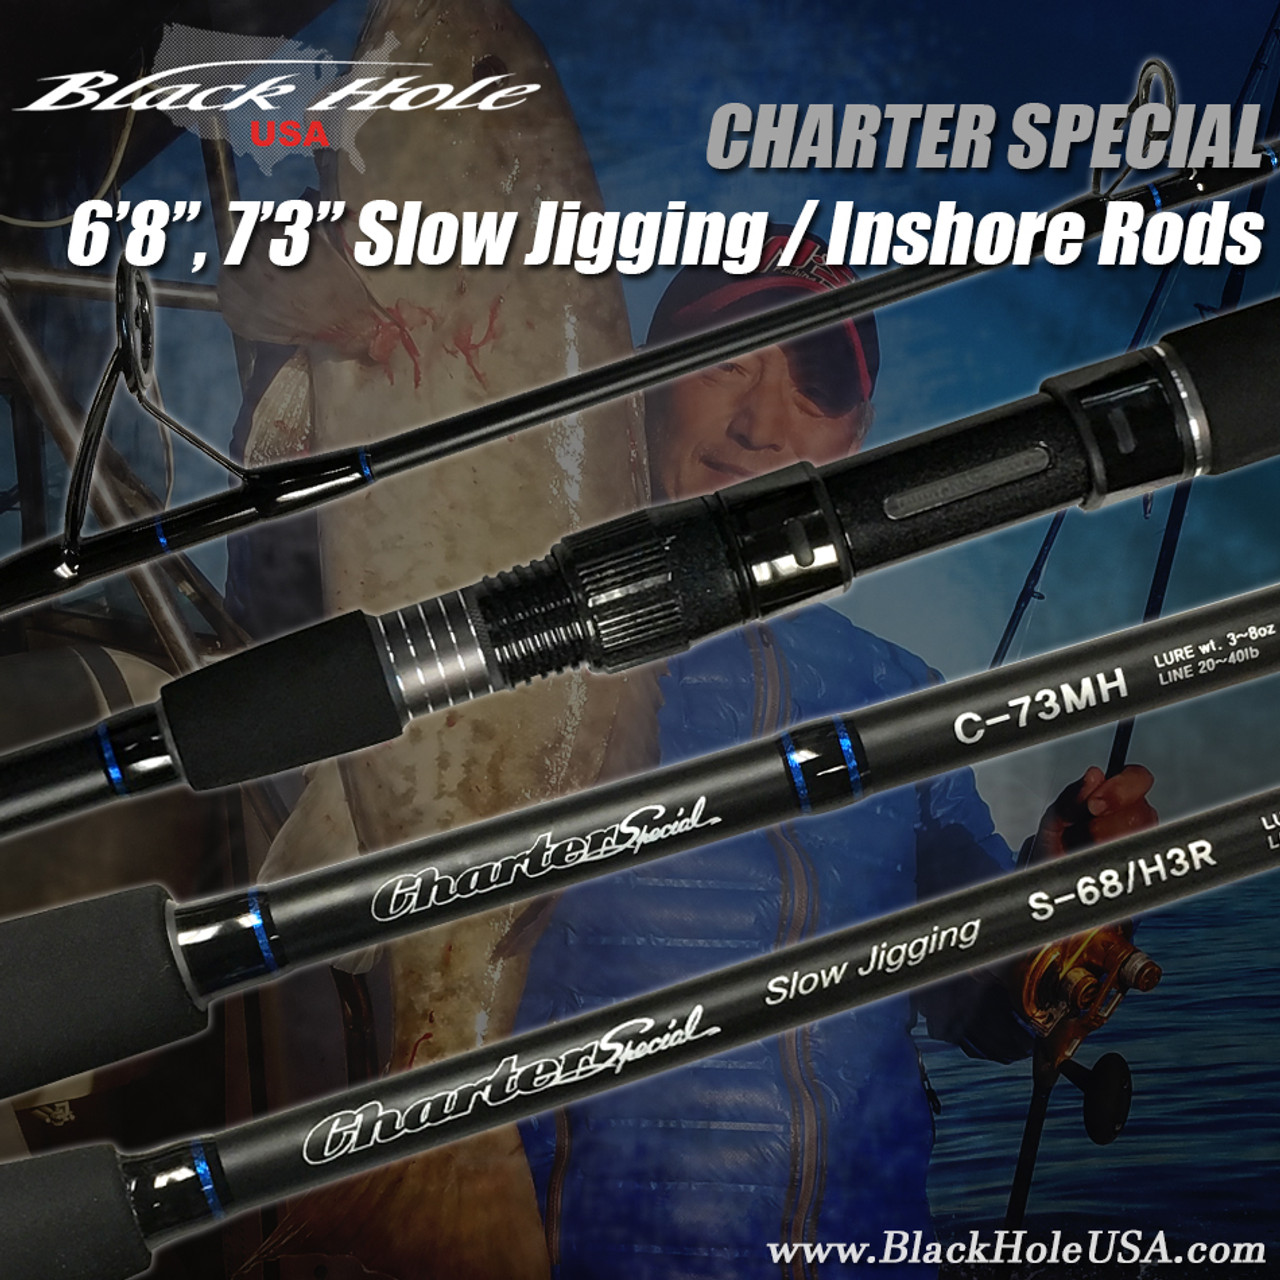 https://cdn11.bigcommerce.com/s-7z0dxjb/images/stencil/1280x1280/products/660/1150/charter_special_slow_jigging_inshore_rods_front_bhusa__17698.1512667556.1280.1280__25955.1524172374.jpg?c=2